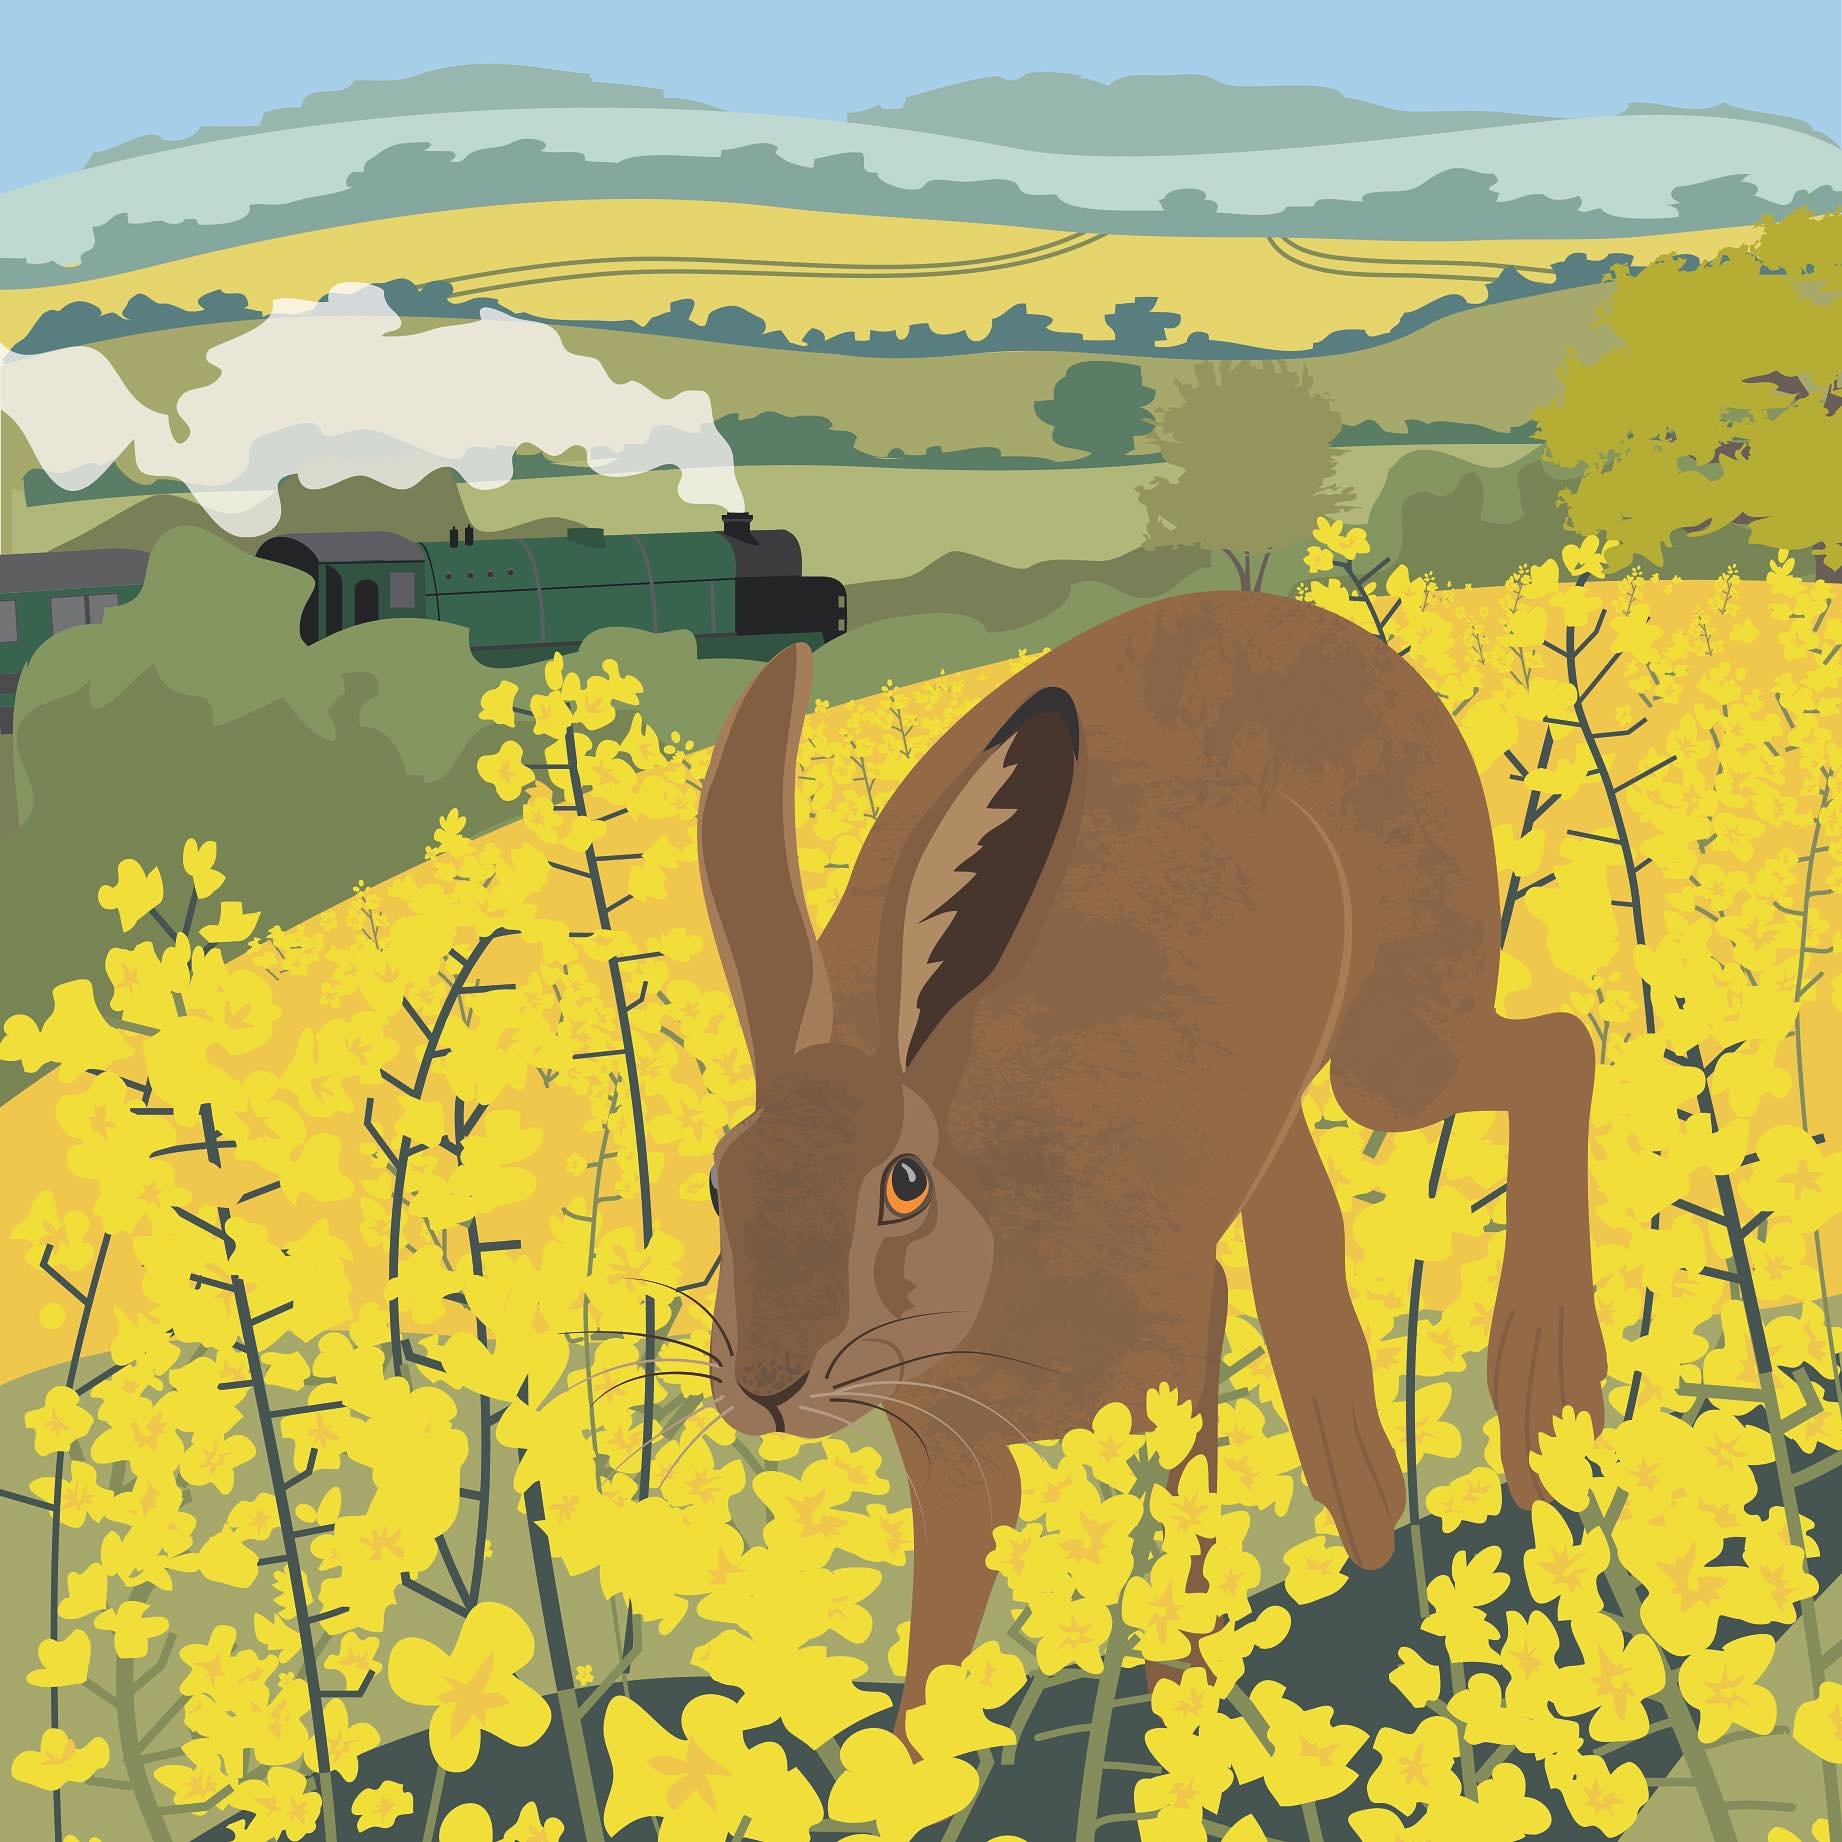 Two hares skittered across the path in front of me yesterday - headed for a race track alongside a field of oil-seed rape. Hello month of May. ☀️